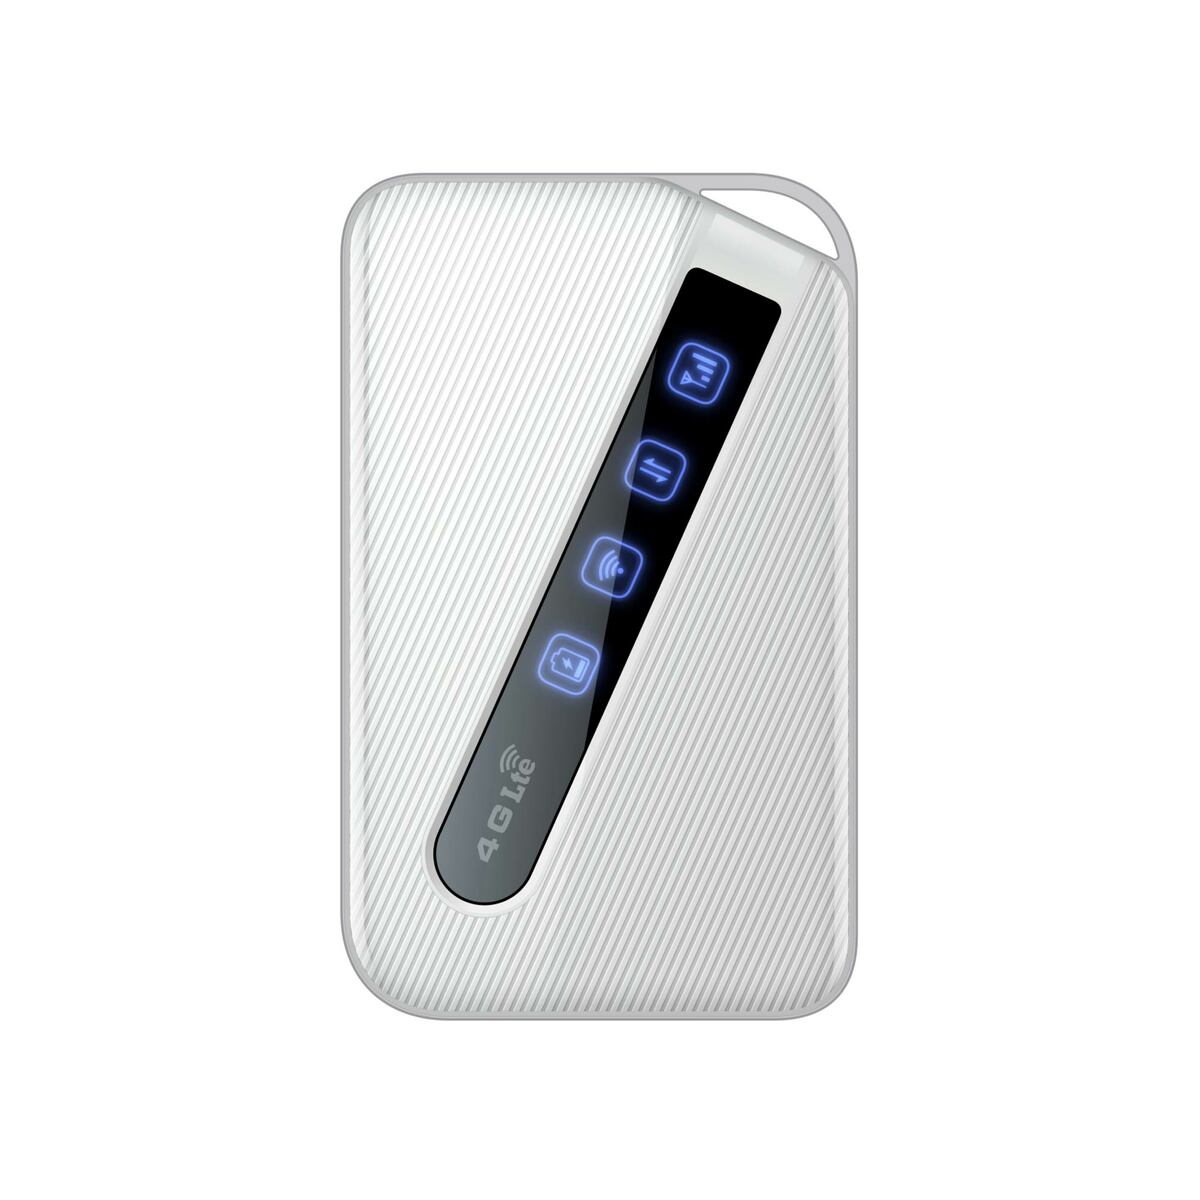 D-Link DWR-930M 4G LTE Mobile Wi-Fi Router